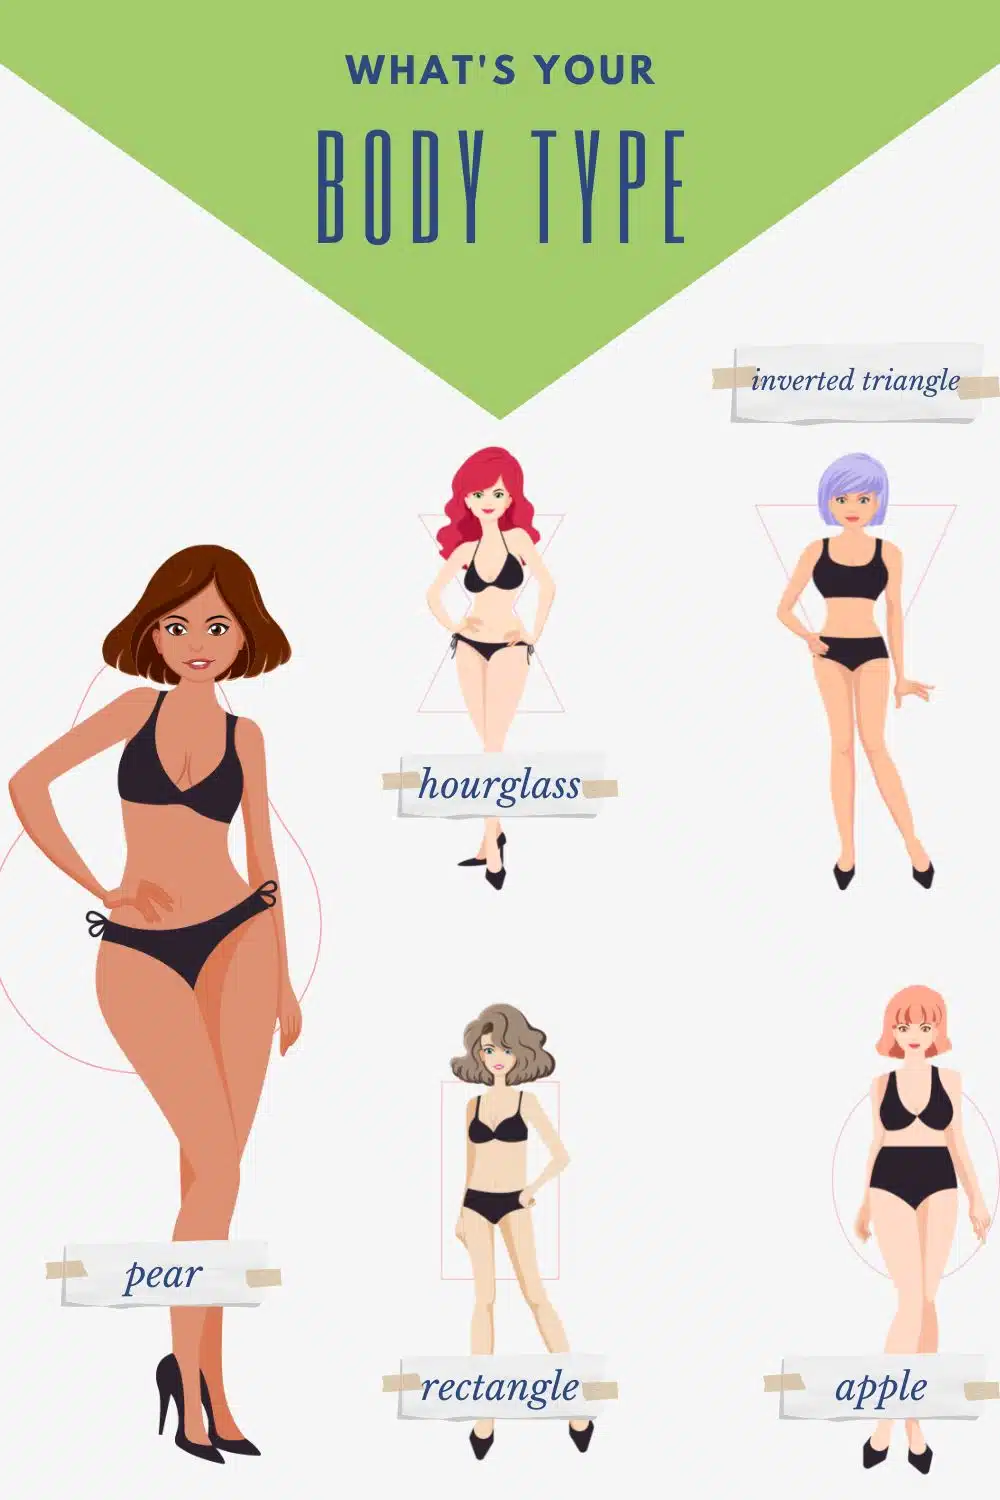 Drawings of five different female body types with labels.